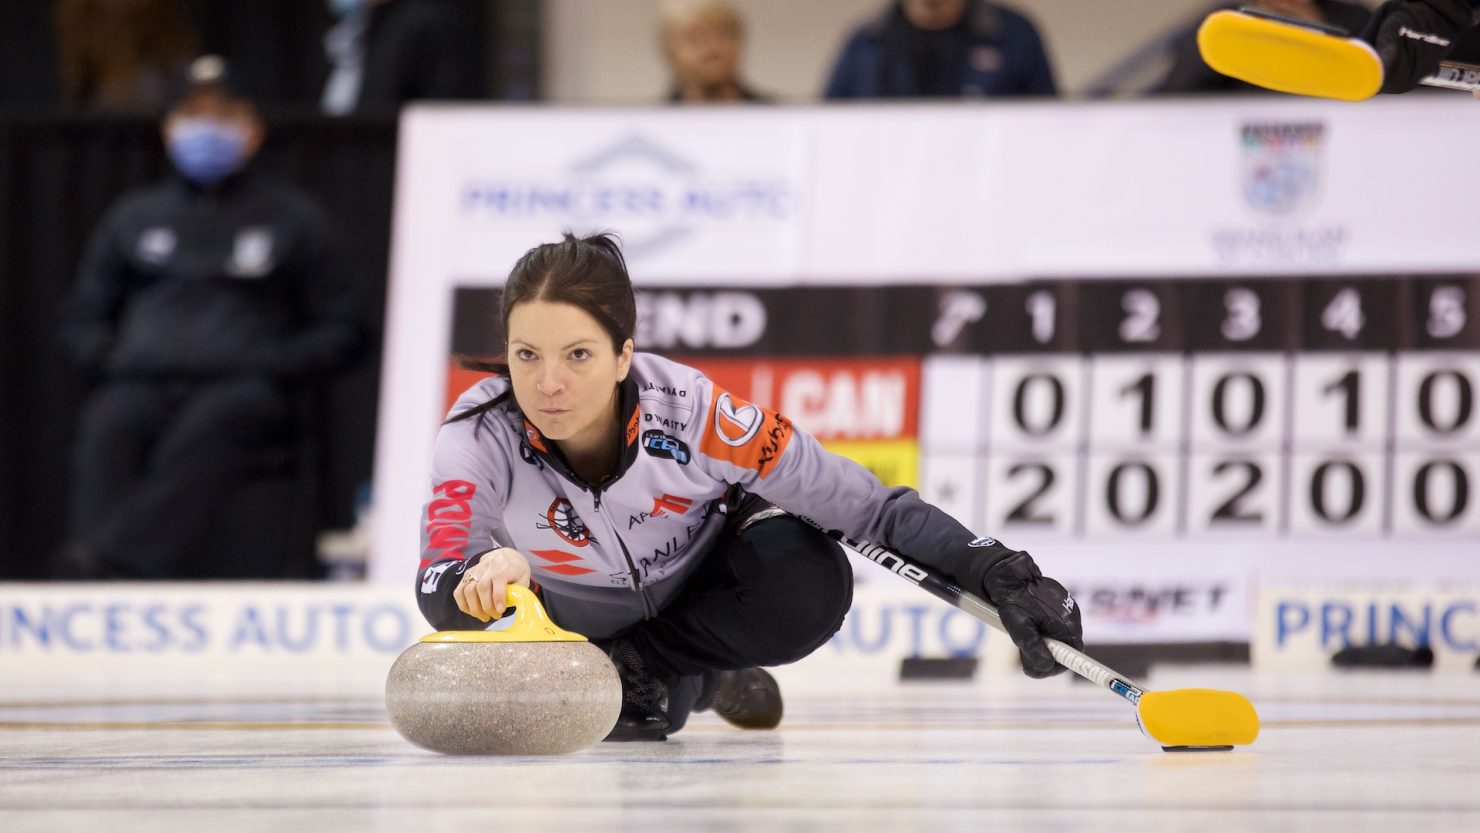 EINARSON PICKS UP SECOND STARIGHT WIN AT CHAMPIONS CUP